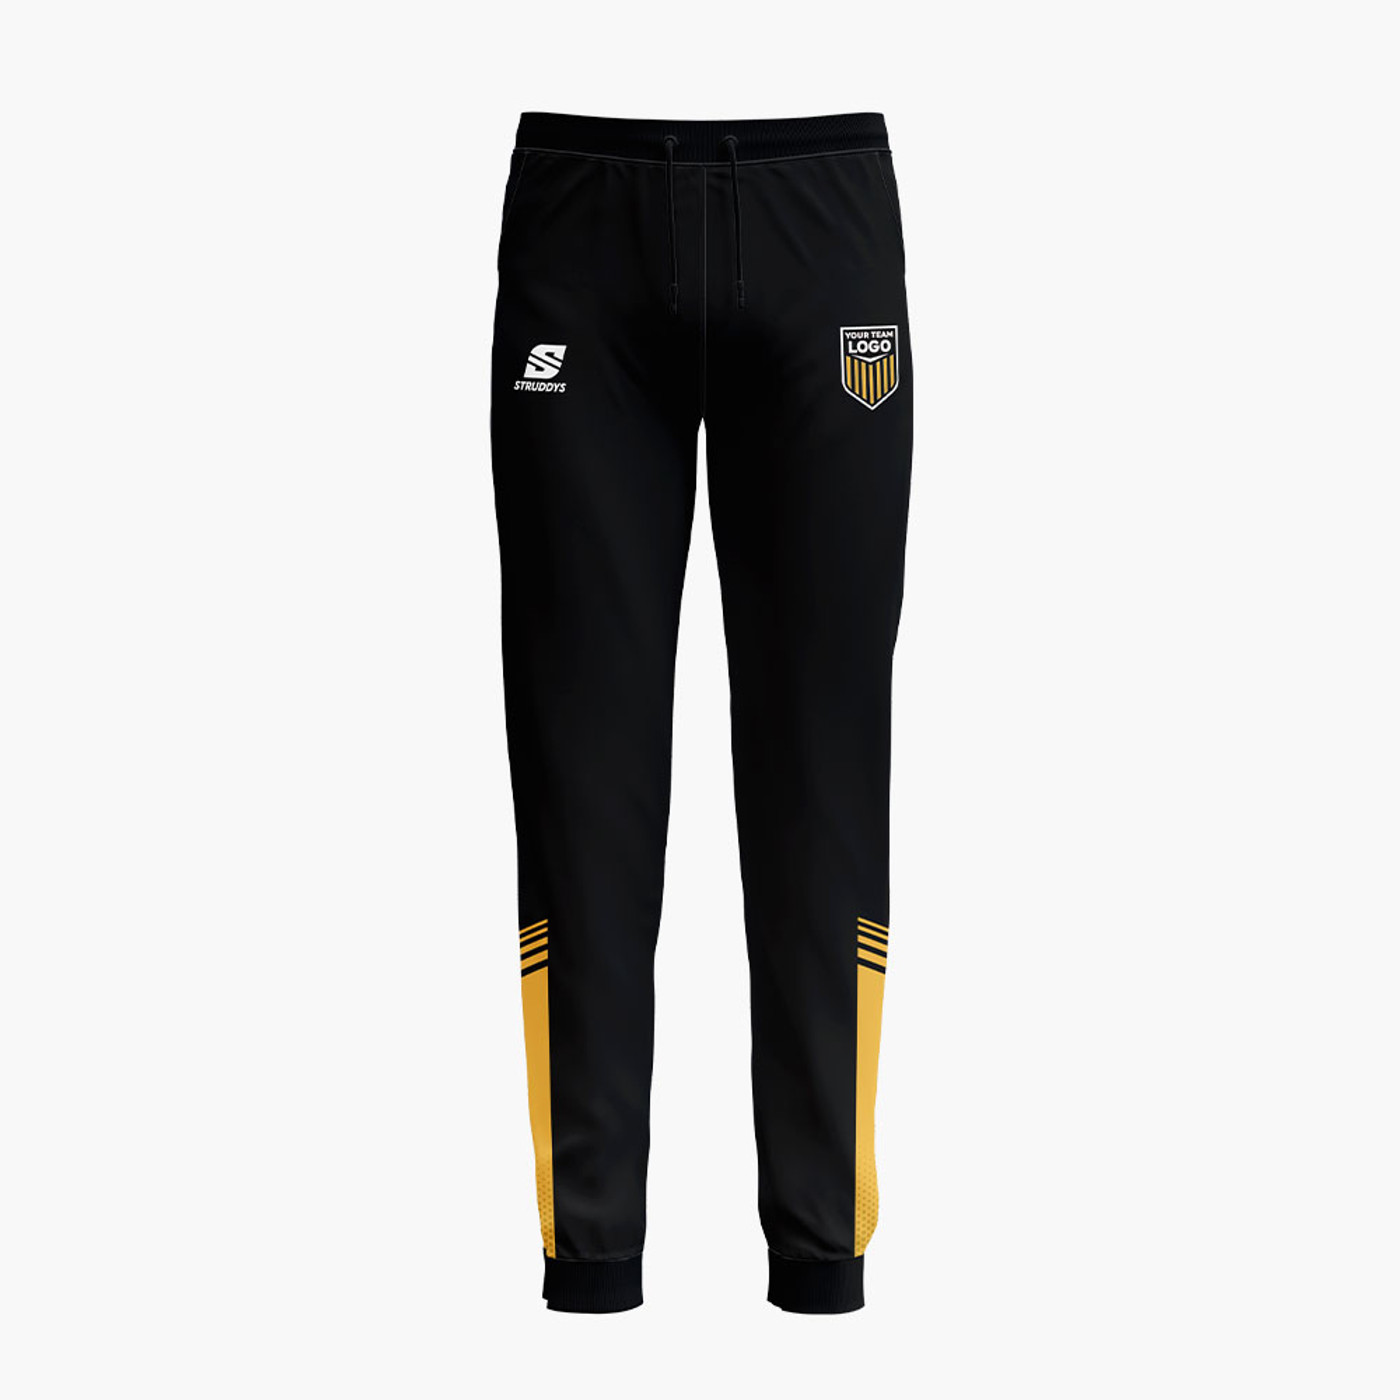 Customisable sublimated track pants